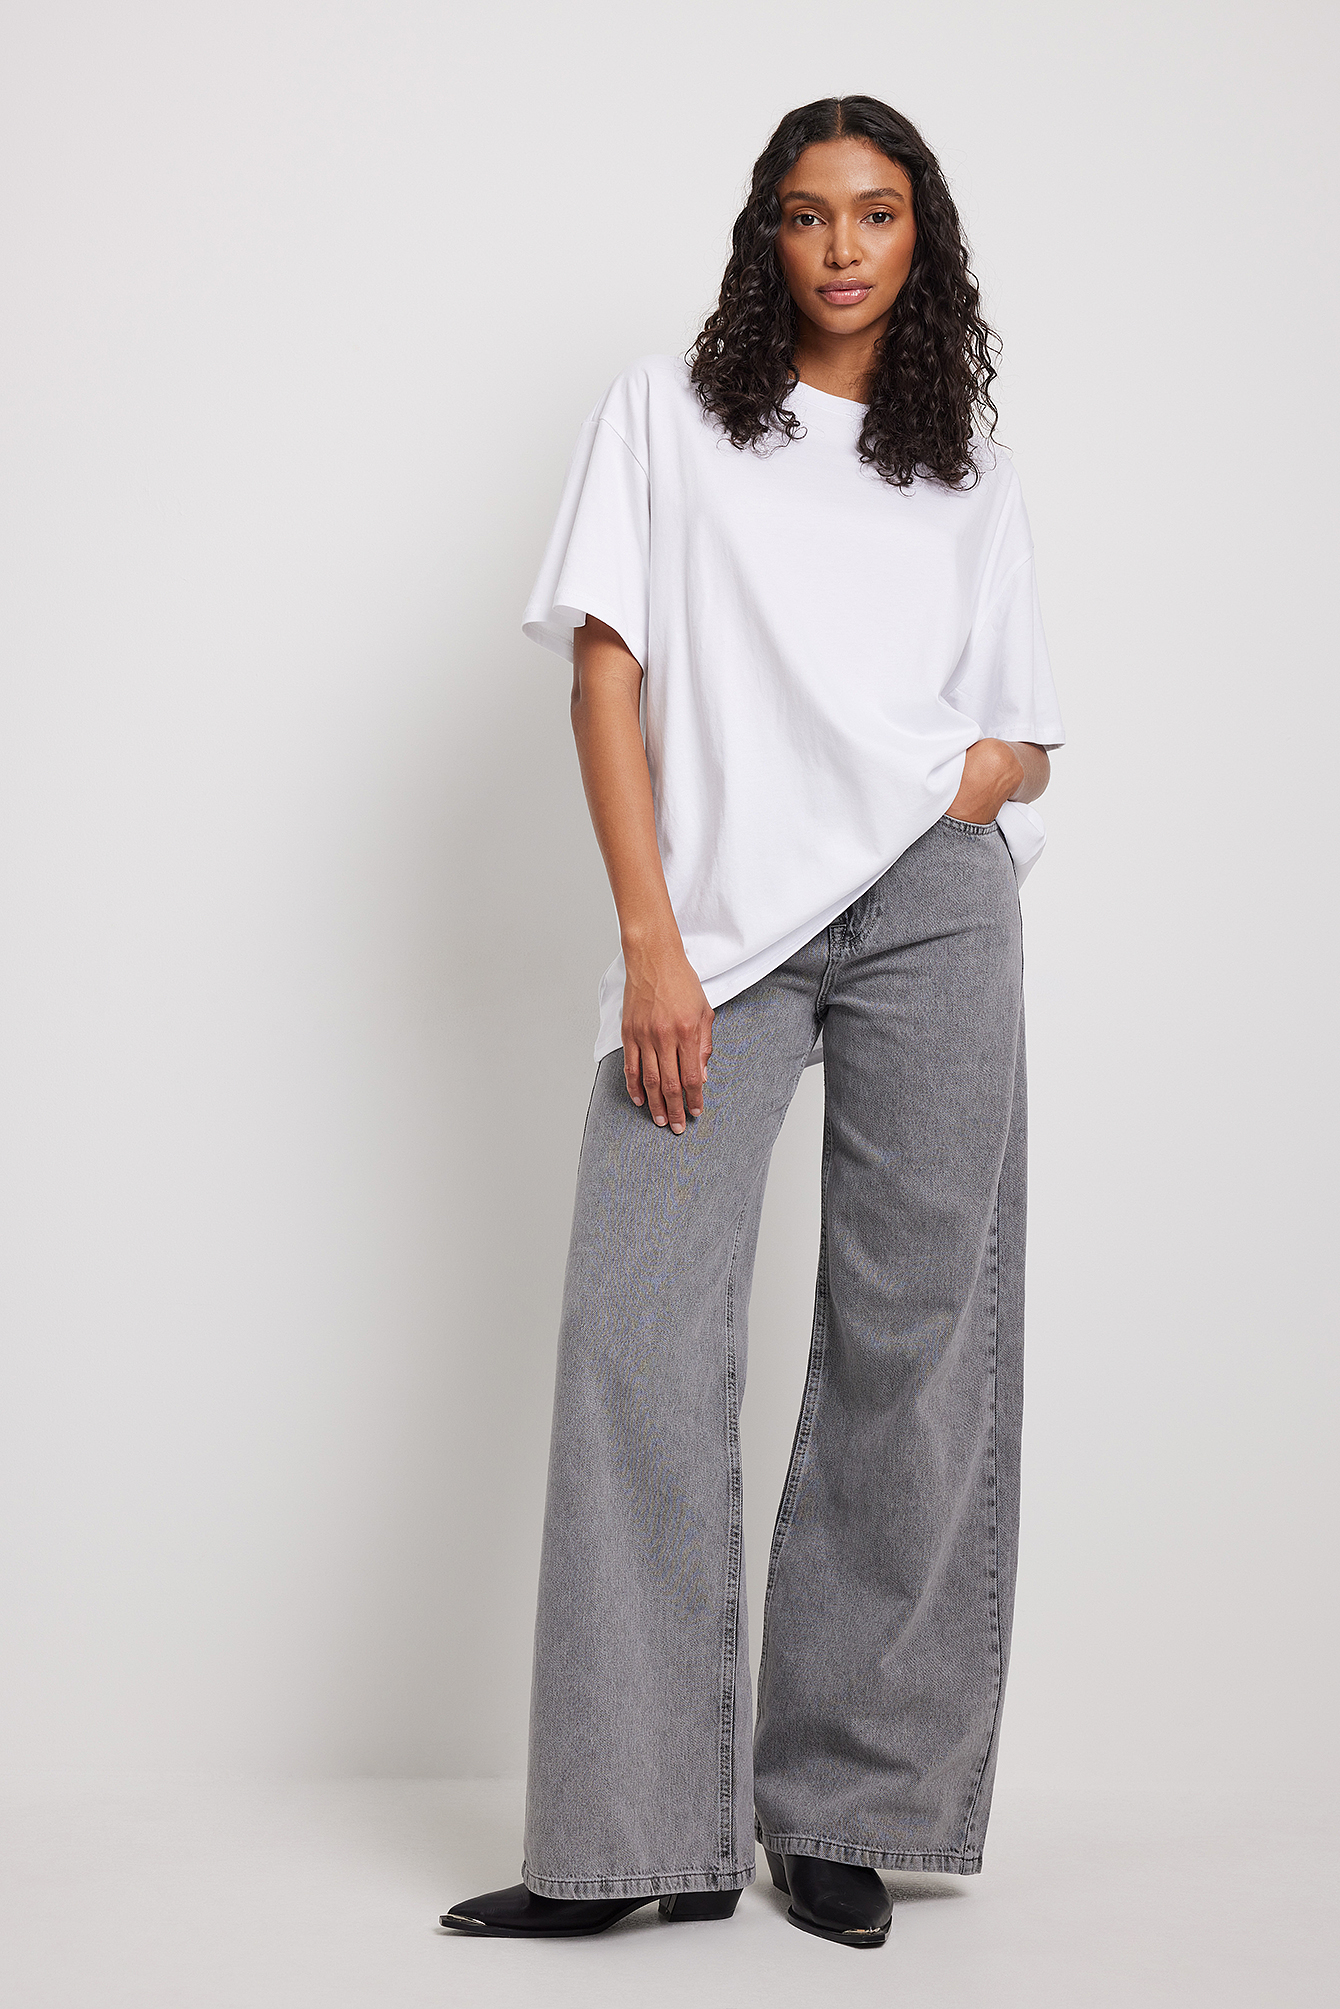 Round Neck Oversized Tee Outfit